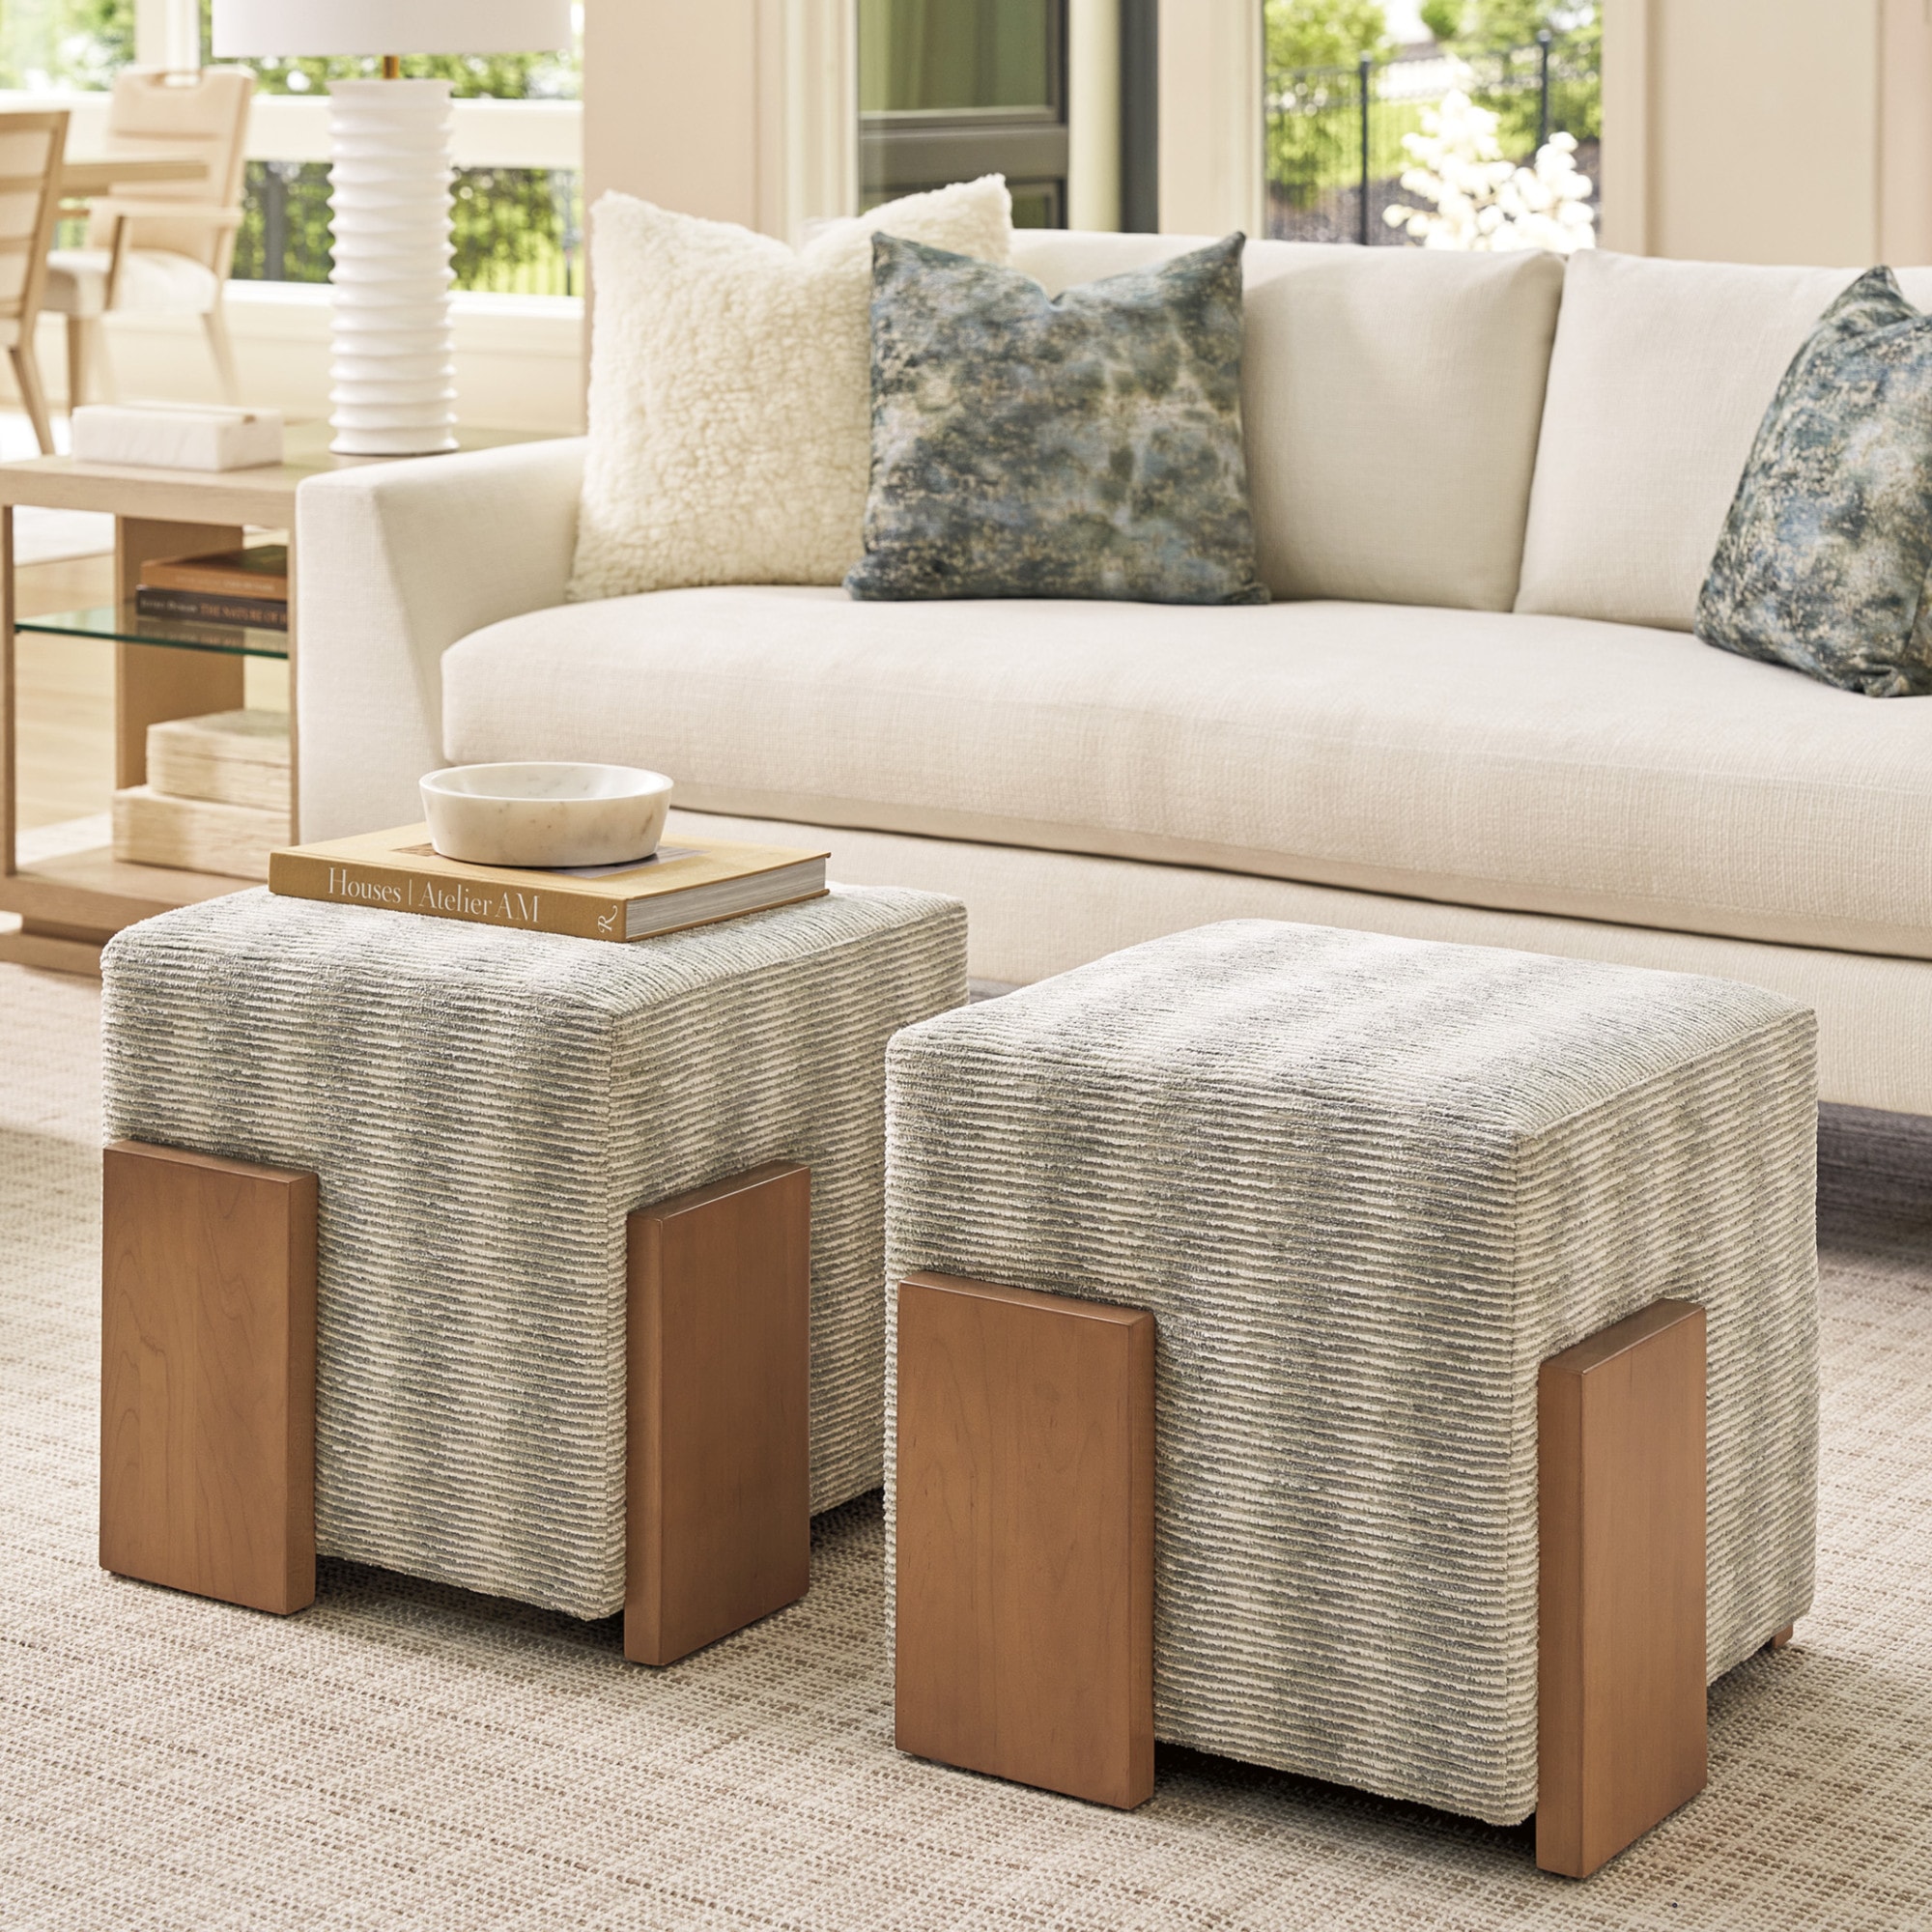 Sunset Key Collection by Tommy Bahama Home, Ottomans